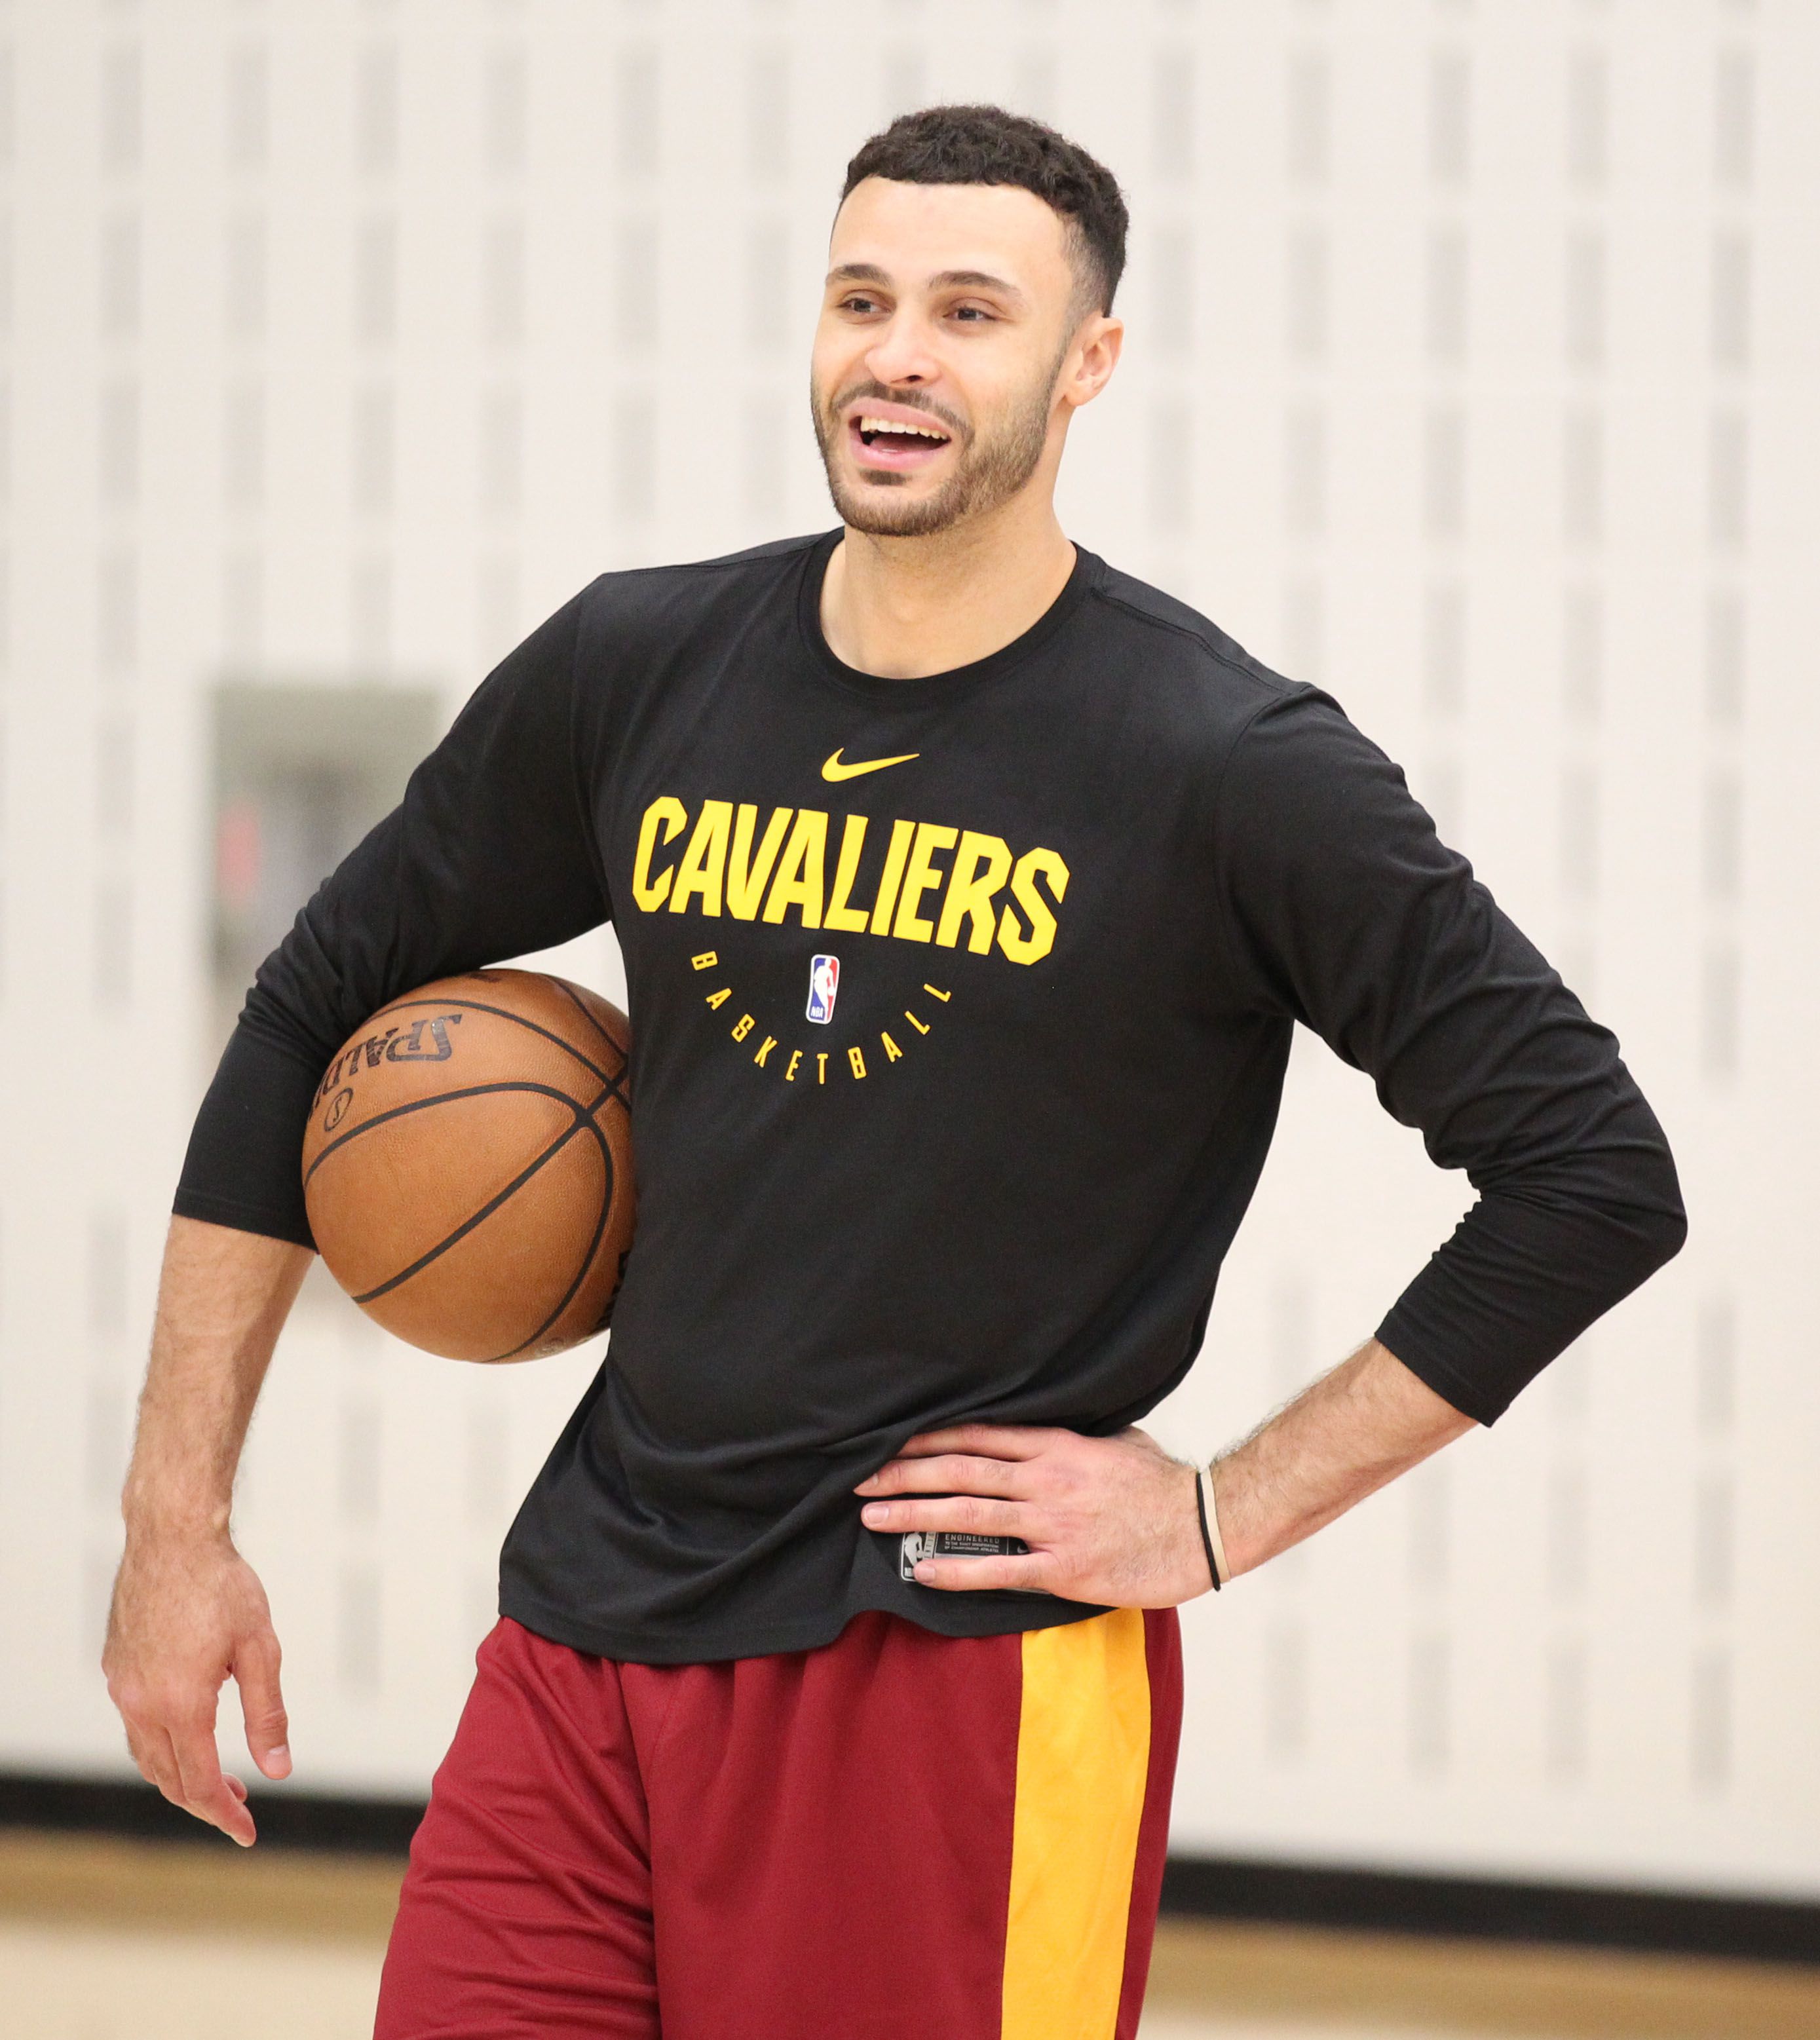 Cleveland Cavaliers player Larry Nance Jr. speaks out about his…